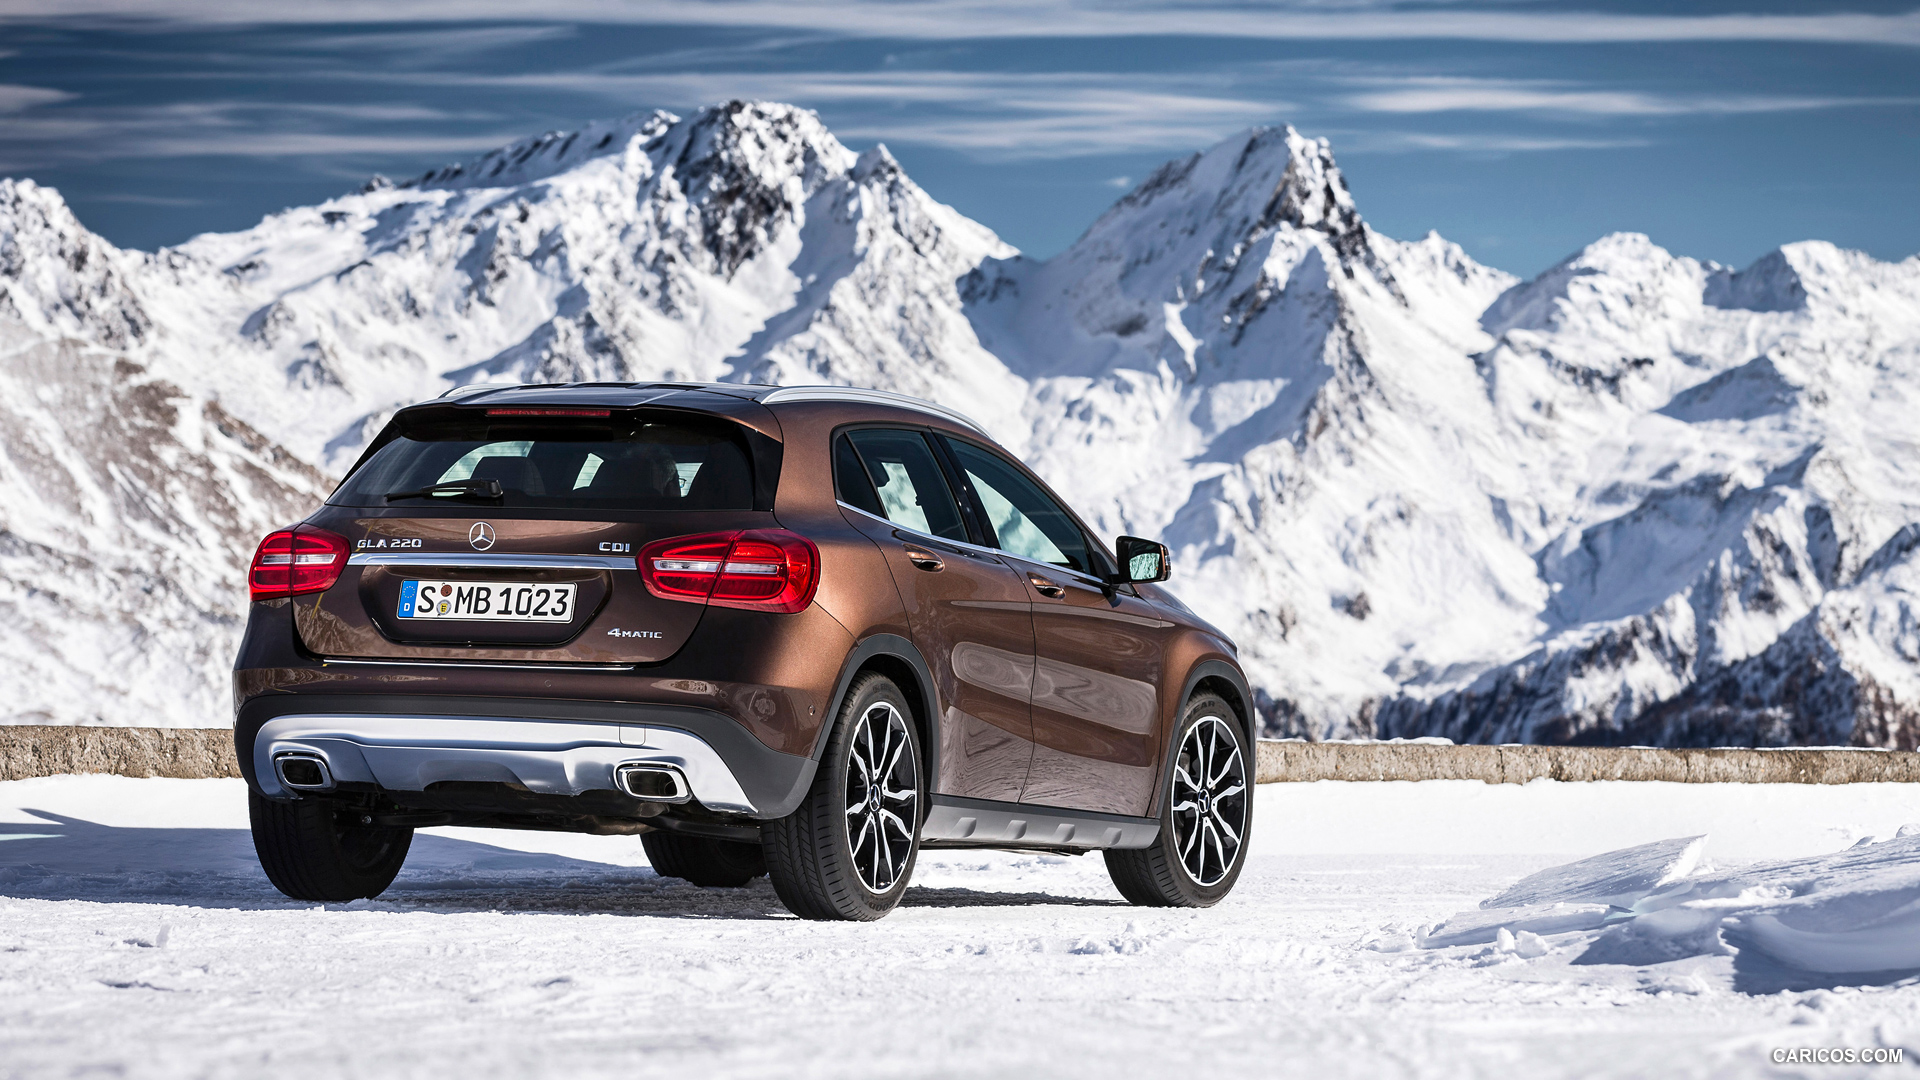 2015 Mercedes-Benz GLA 220 CDI 4MATIC - In Snow - Rear, #68 of 71